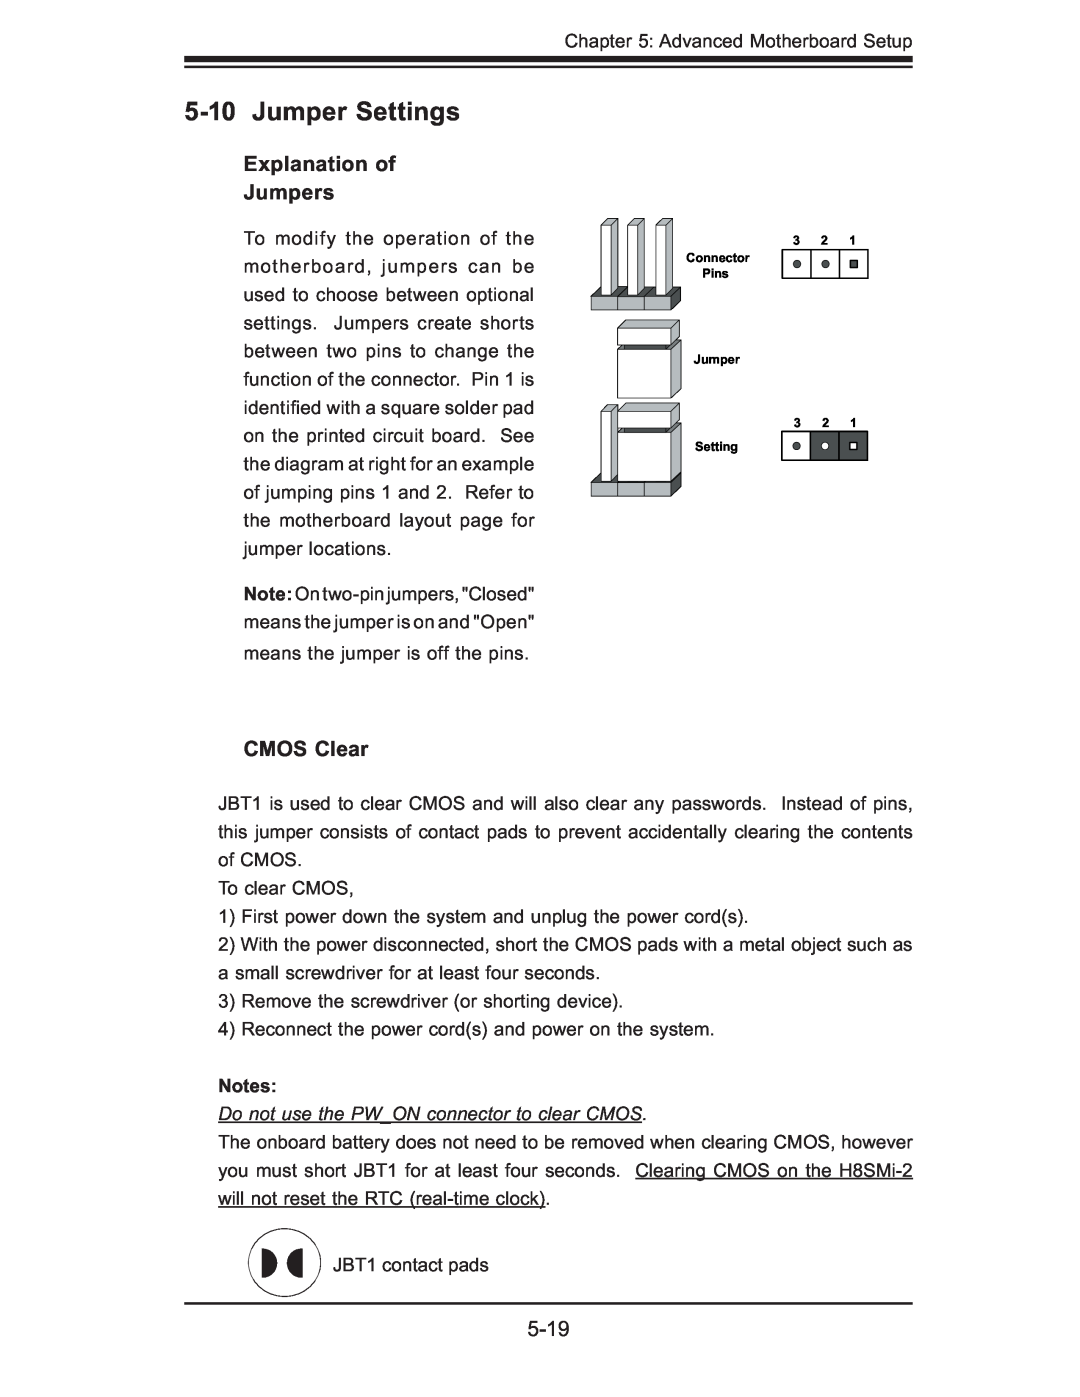 SUPER MICRO Computer AS1011M-T2 user manual Jumper Settings, Explanation of Jumpers, CMOS Clear 